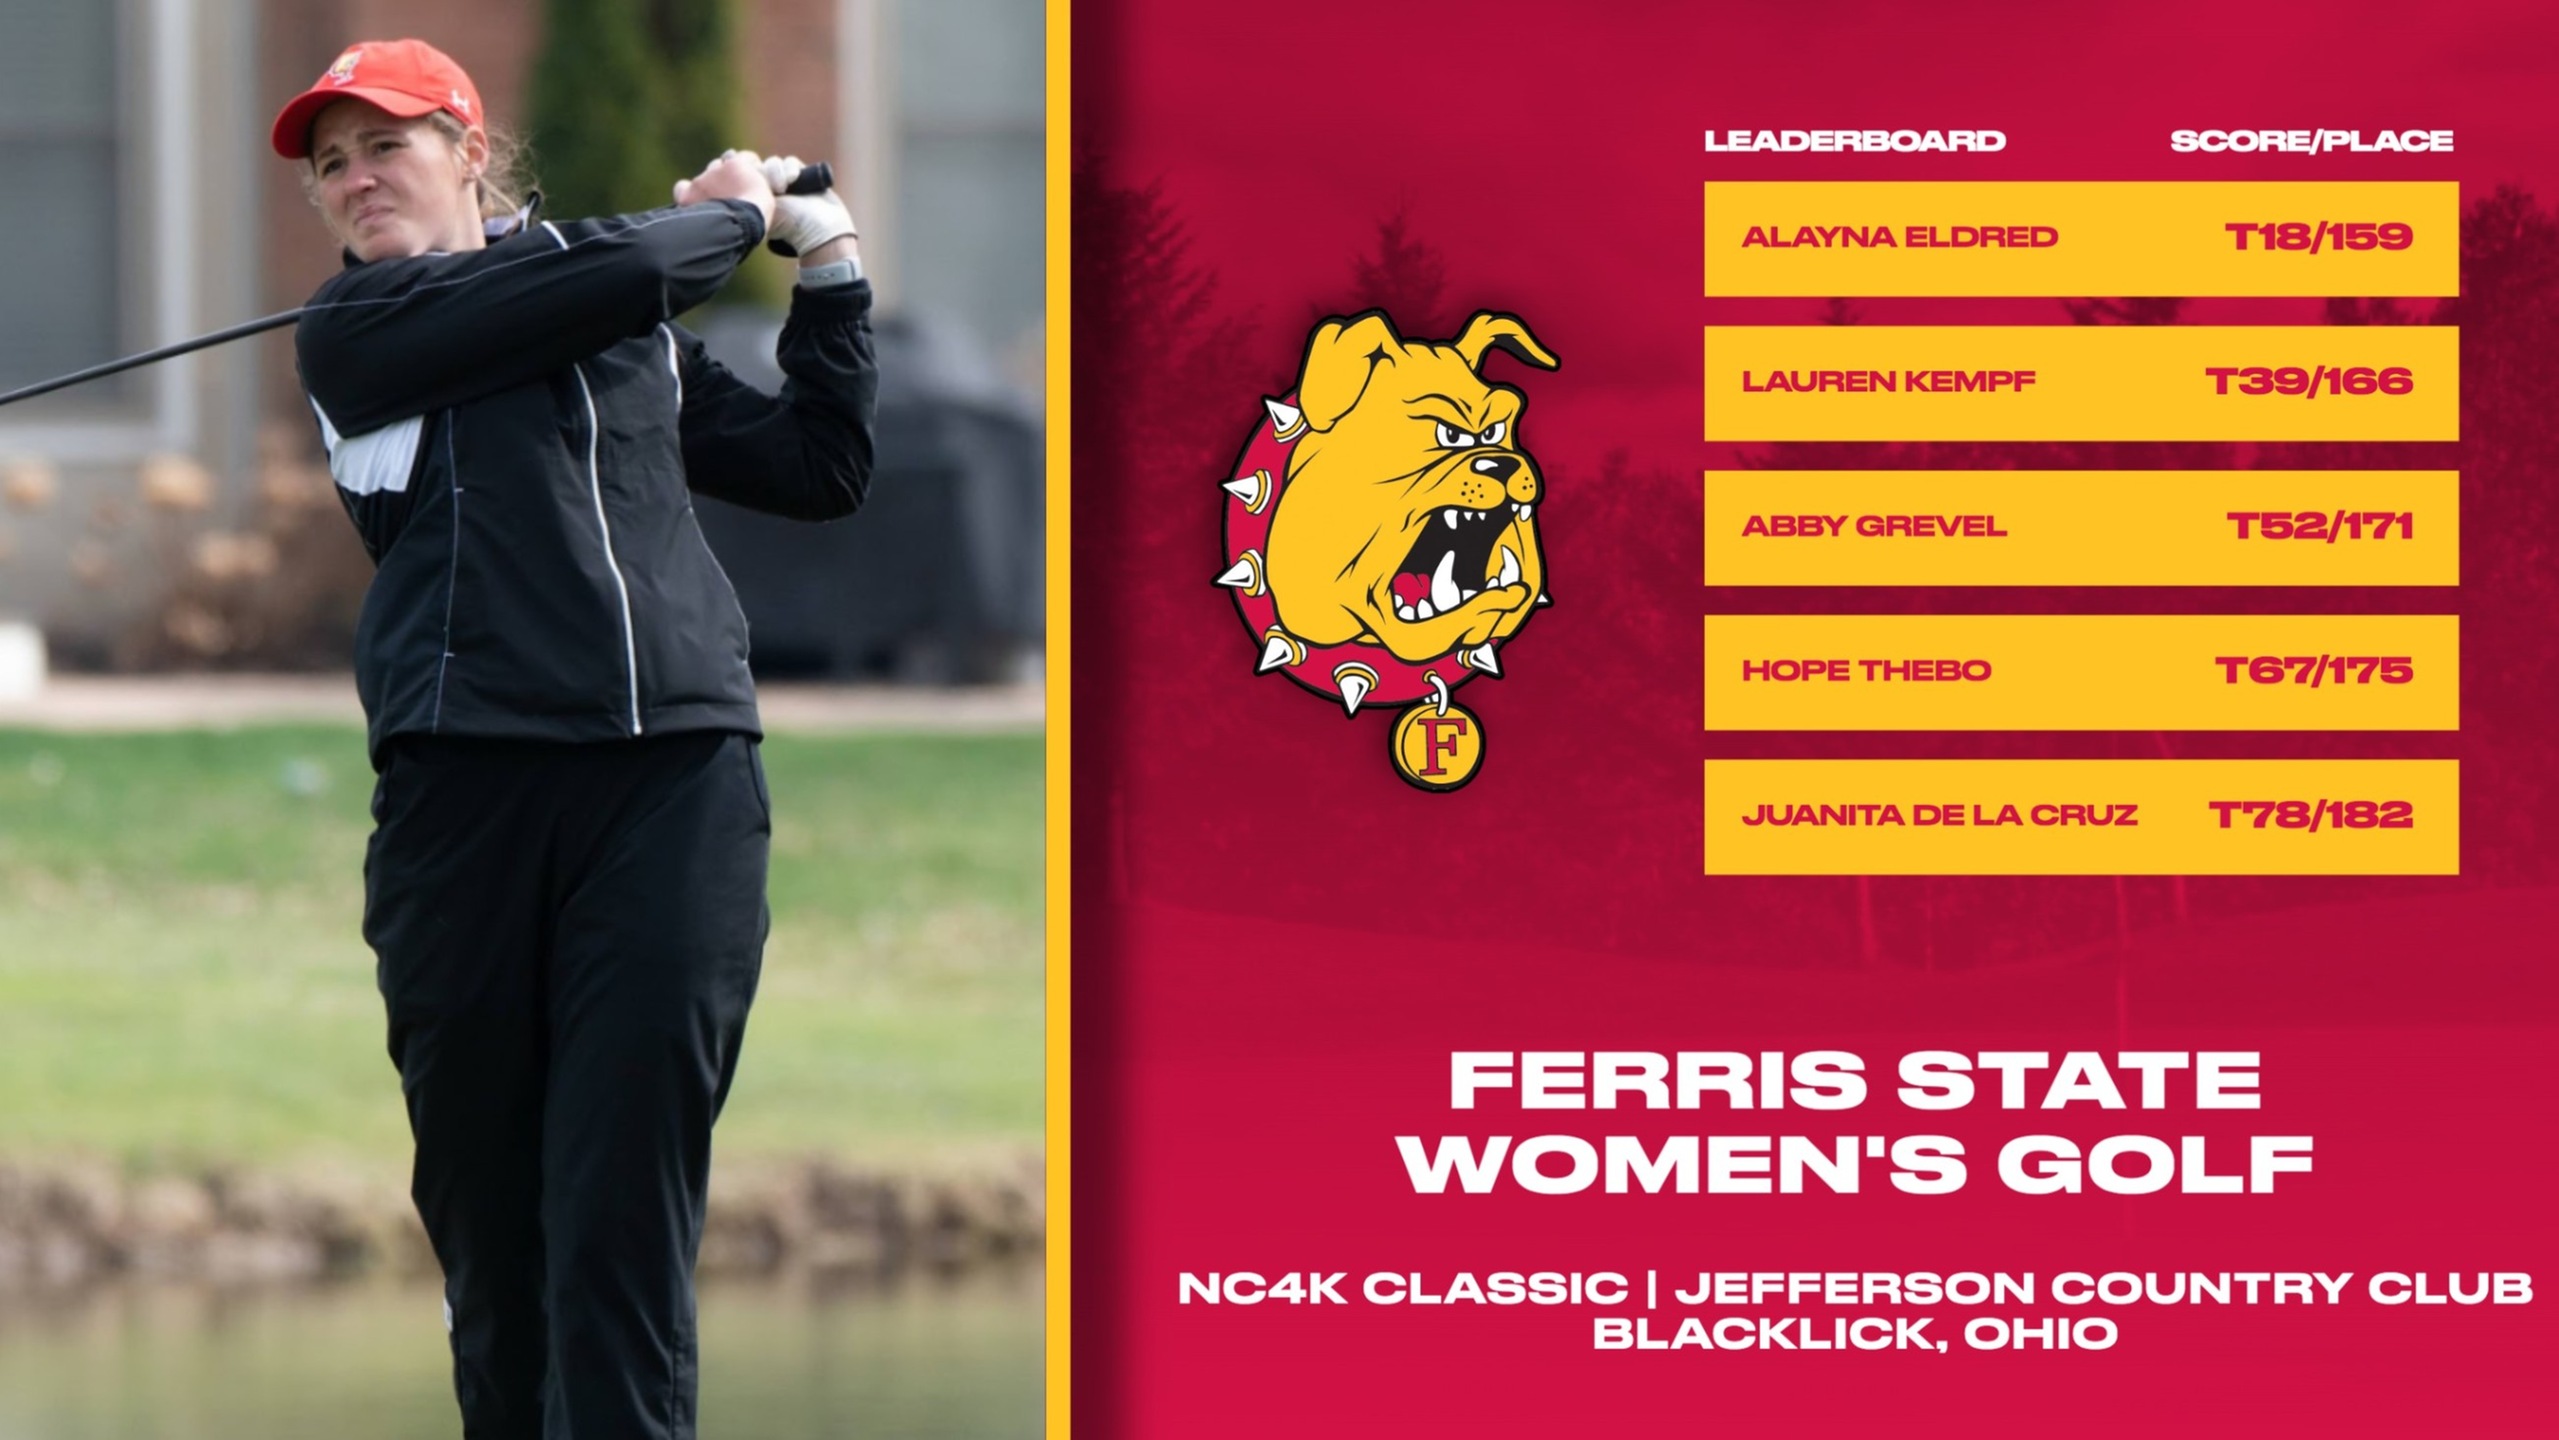 Ferris State Lowers Score By 21 Strokes In Final Round At NC4K College Classic